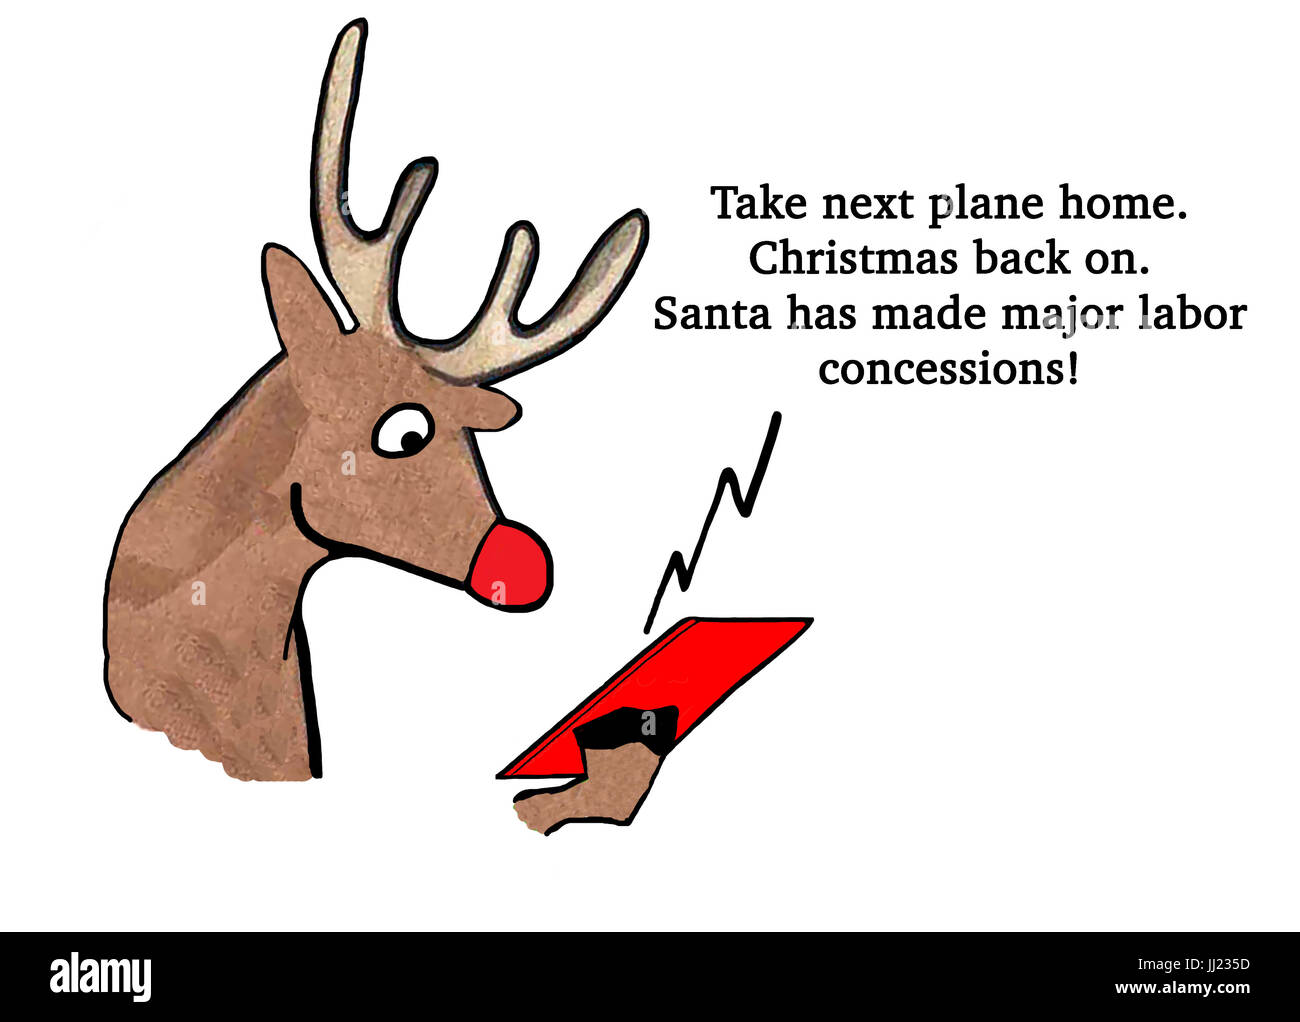 Christmas cartoon about the reindeer winning a labor negotiation with Santa Claus. Stock Photo